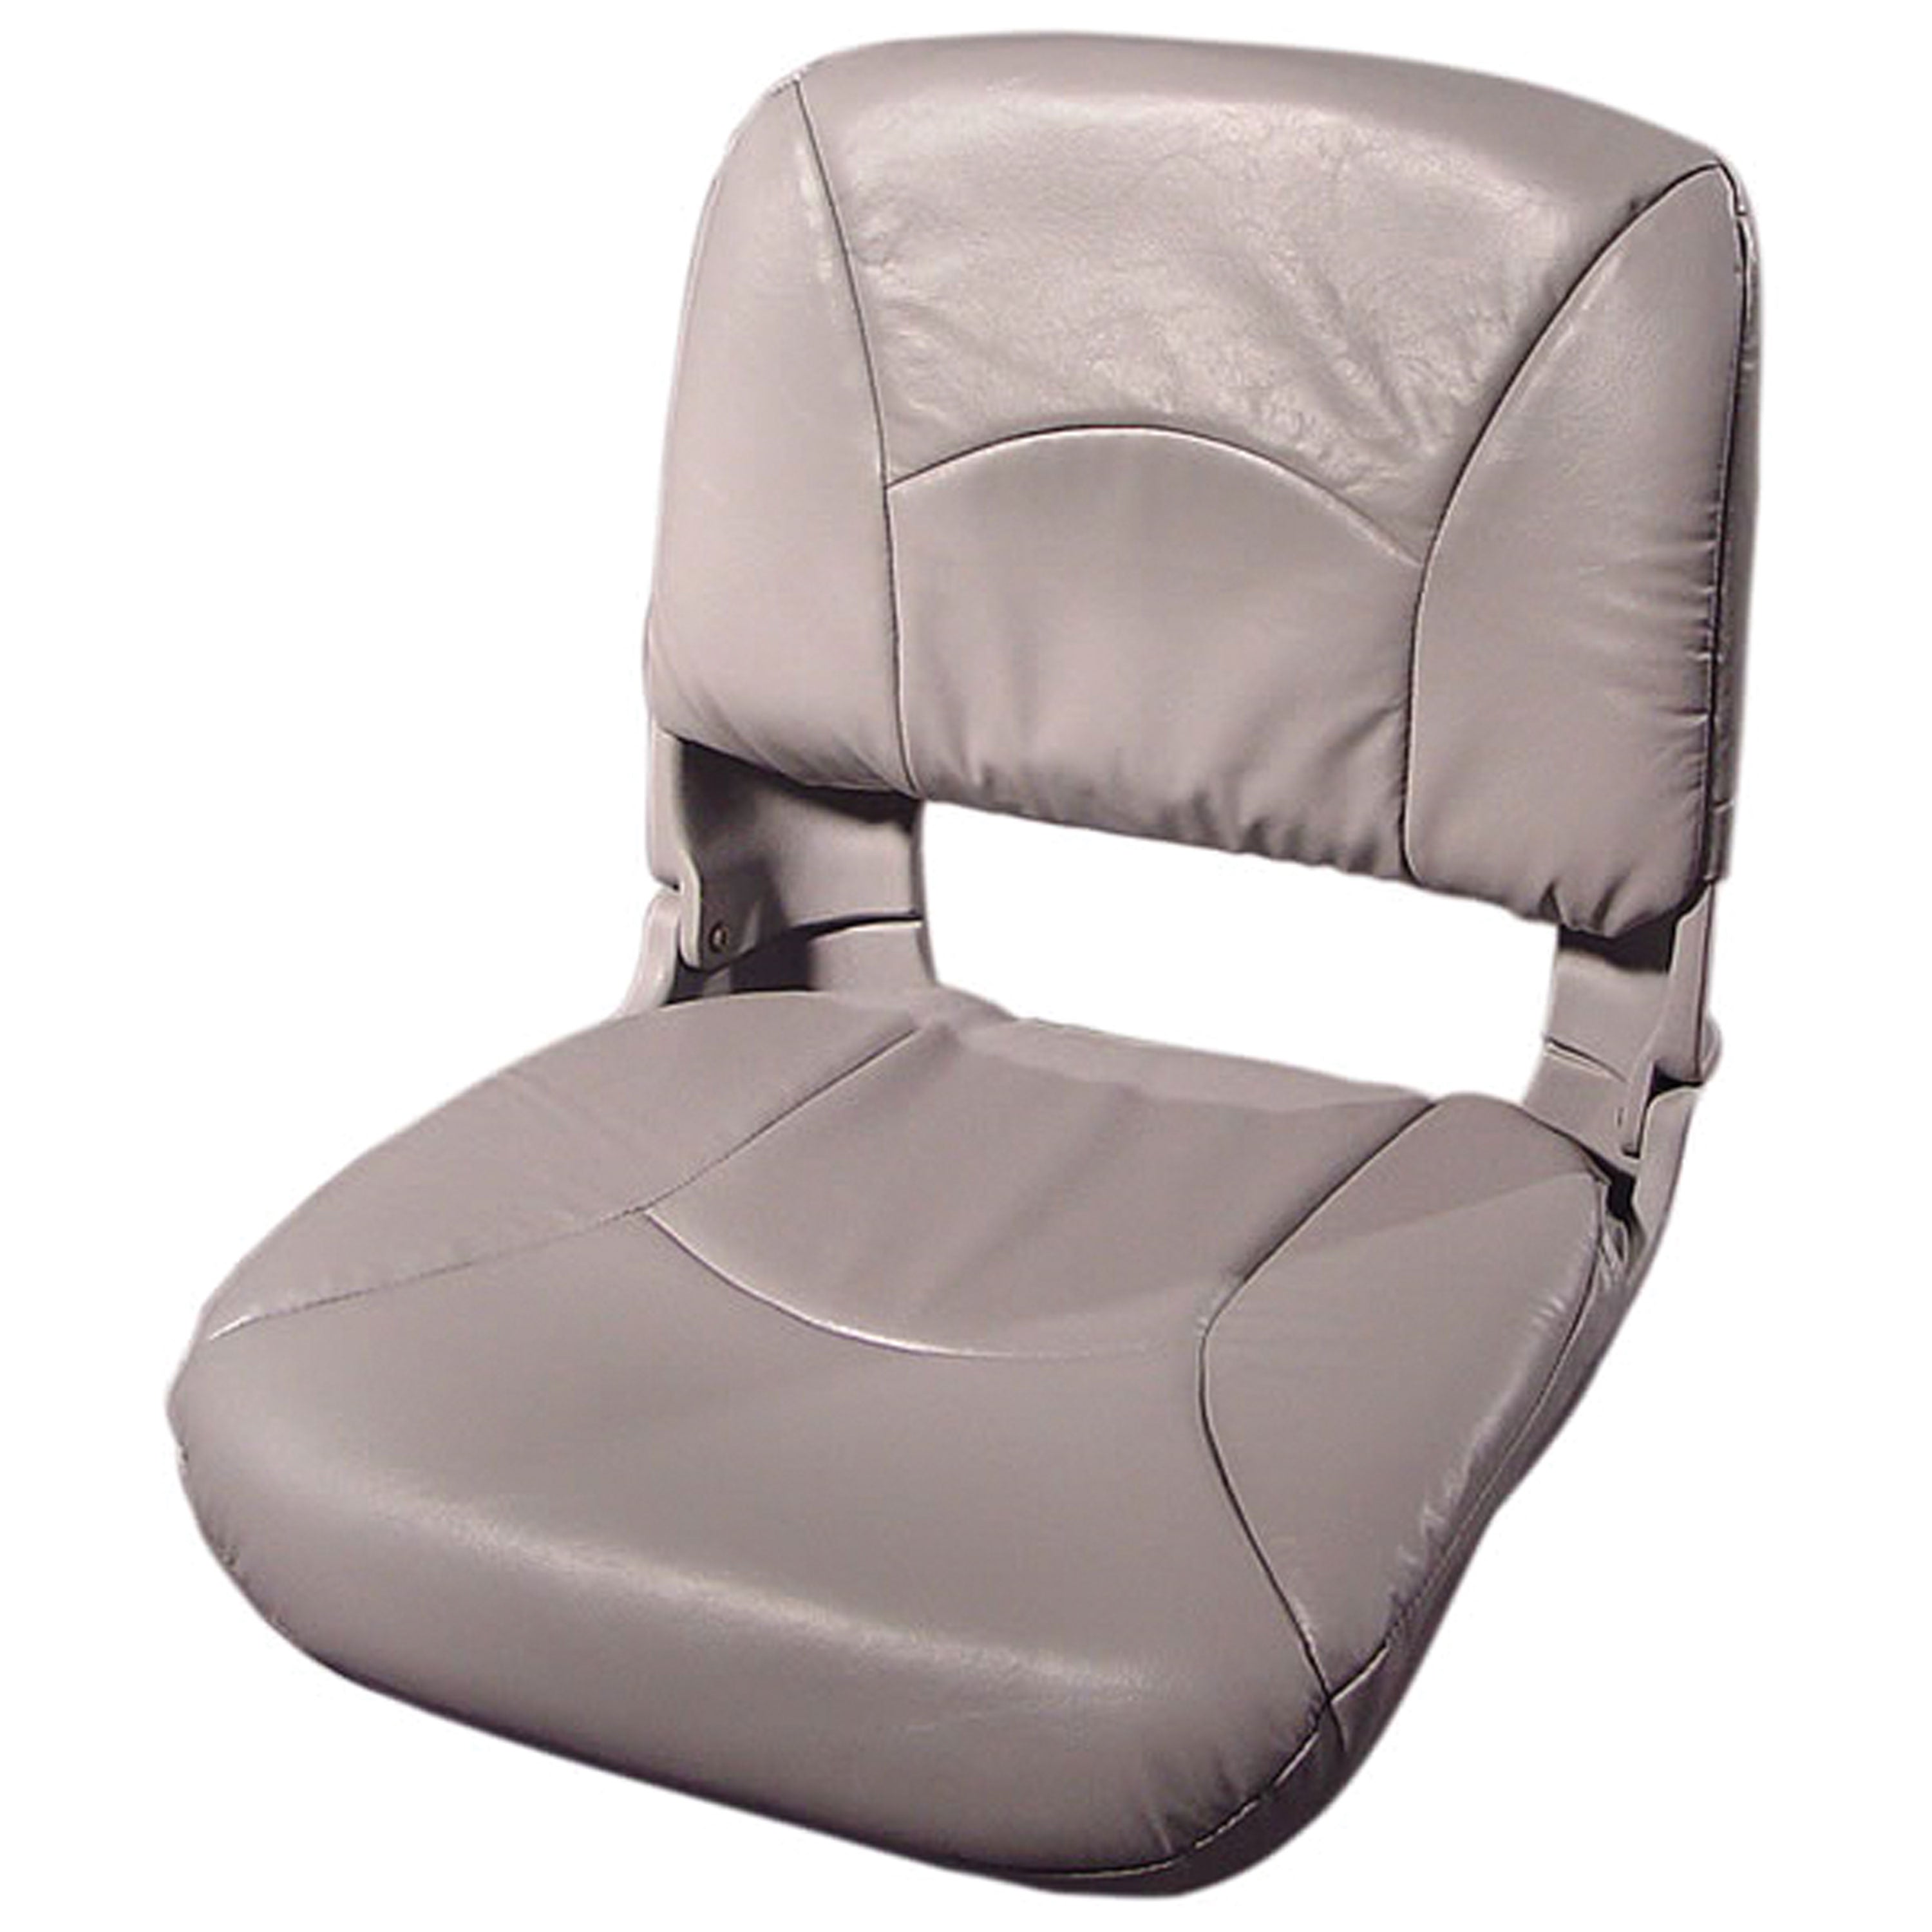 Tempress 45602 All-Weather High-Back Boat Seat - Gray